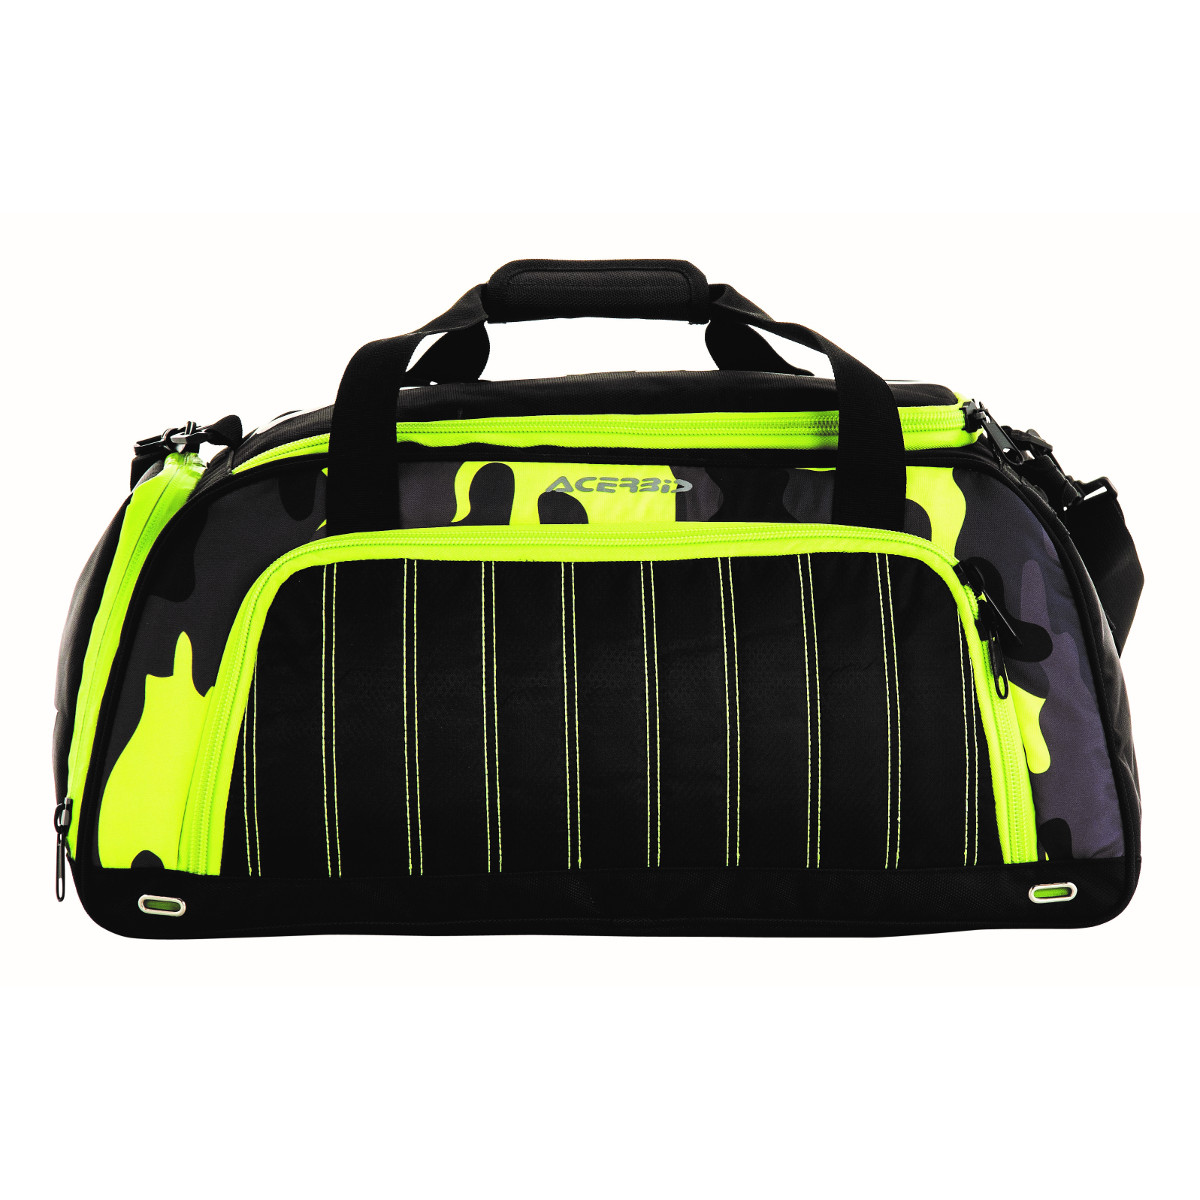 Acerbis Sports and Travel Bag Profile 50 Liter - Camouflage